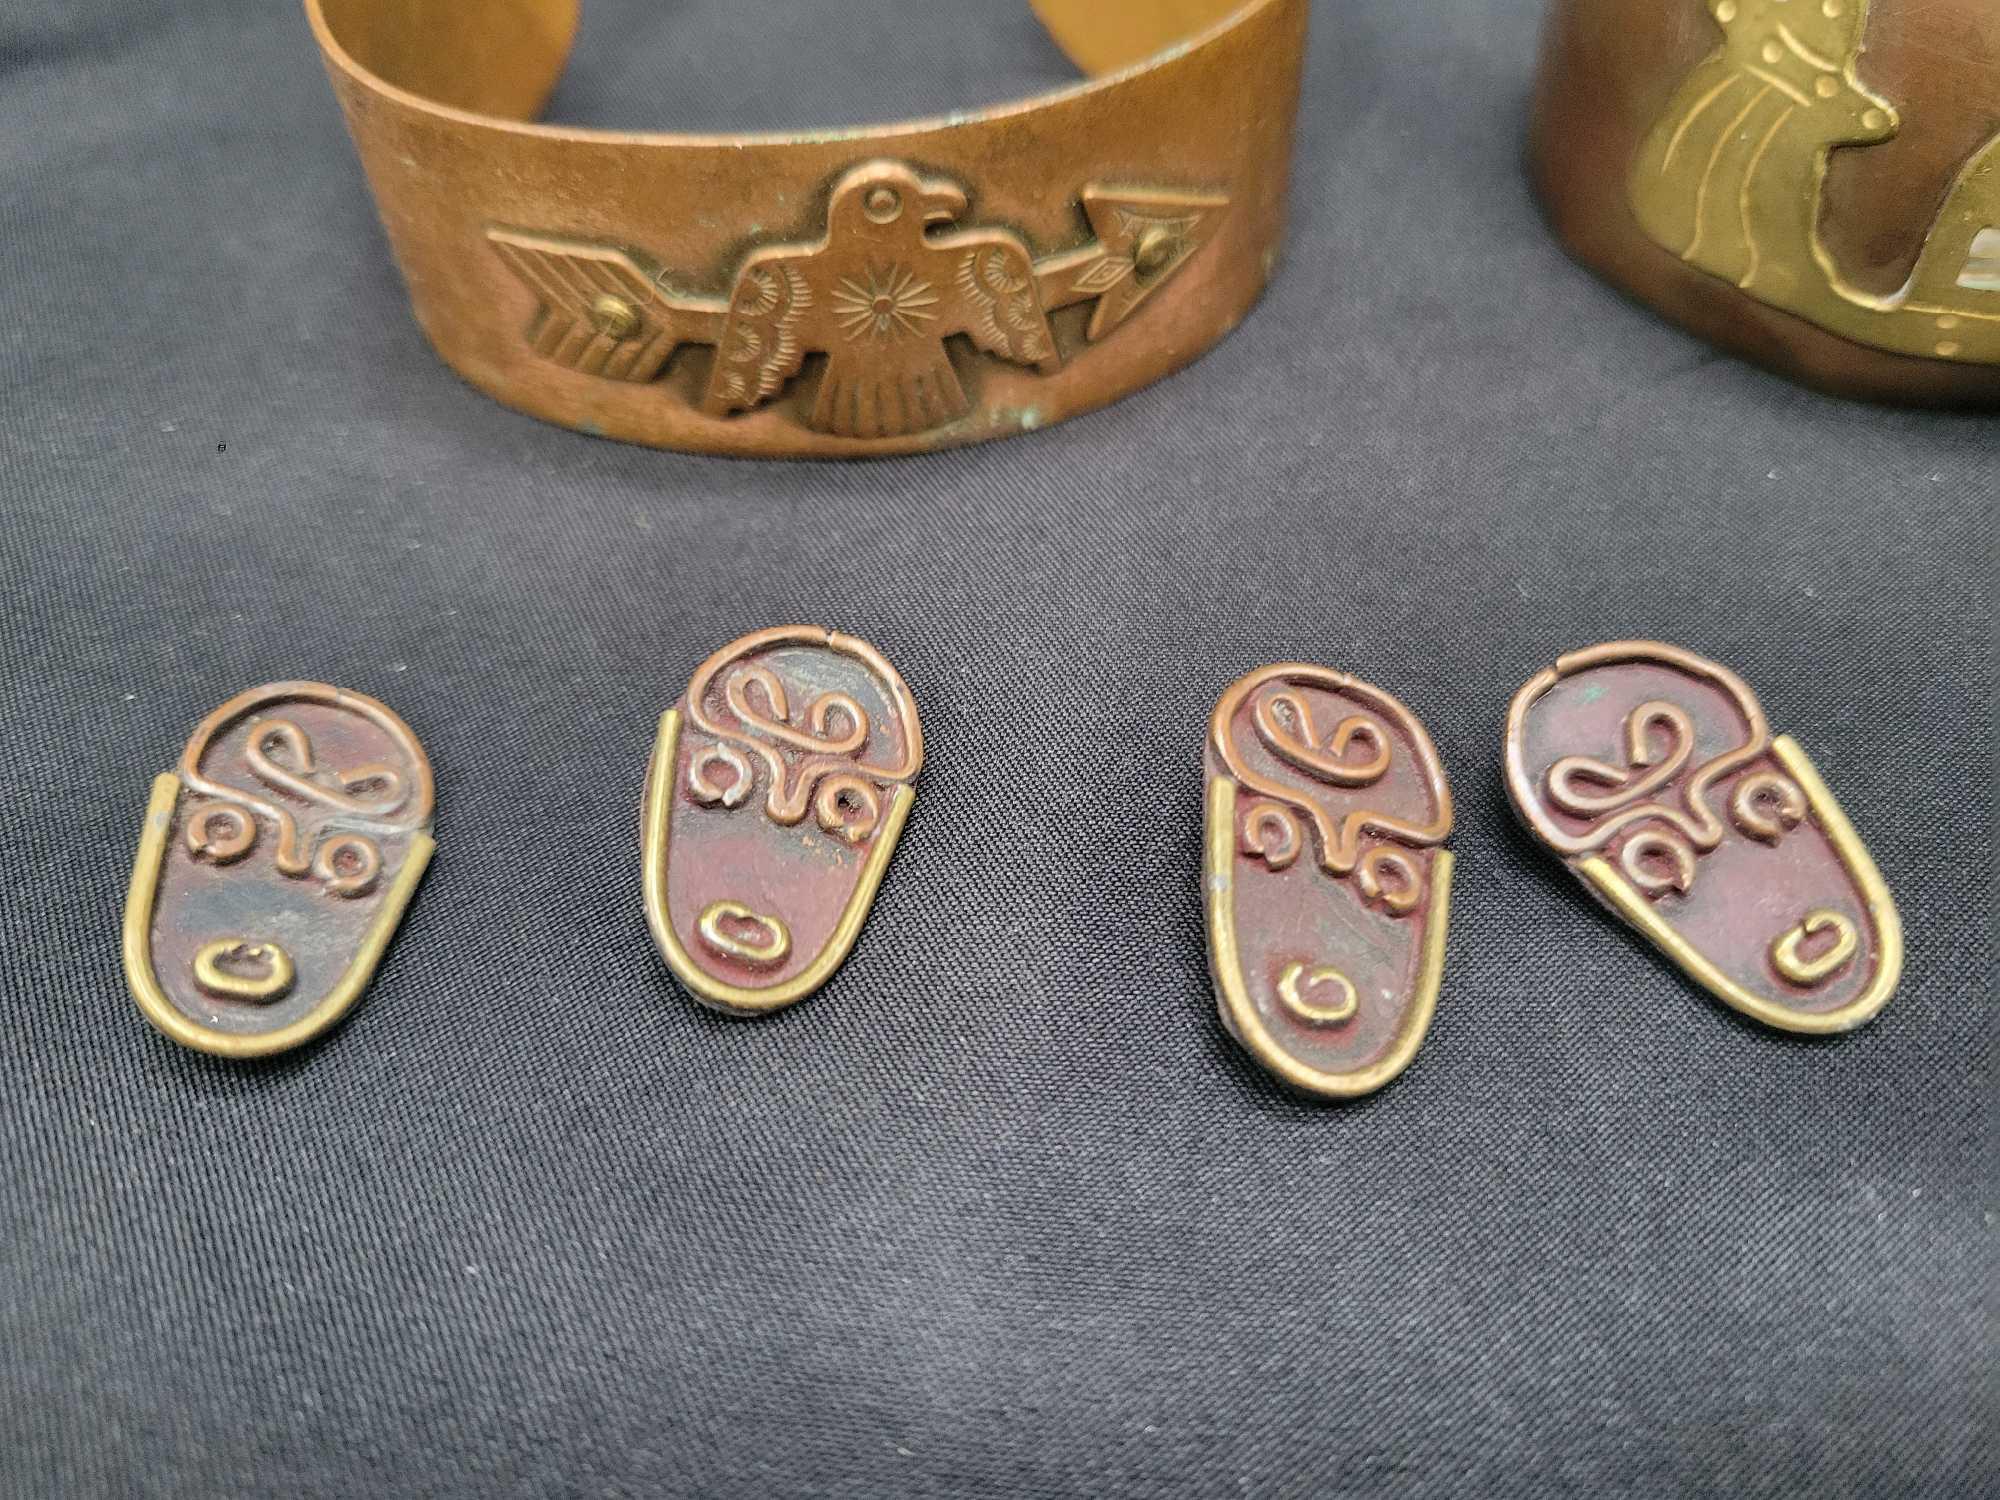 Vintage Mexican, Southwestern style copper cuff bracelets and jewelry